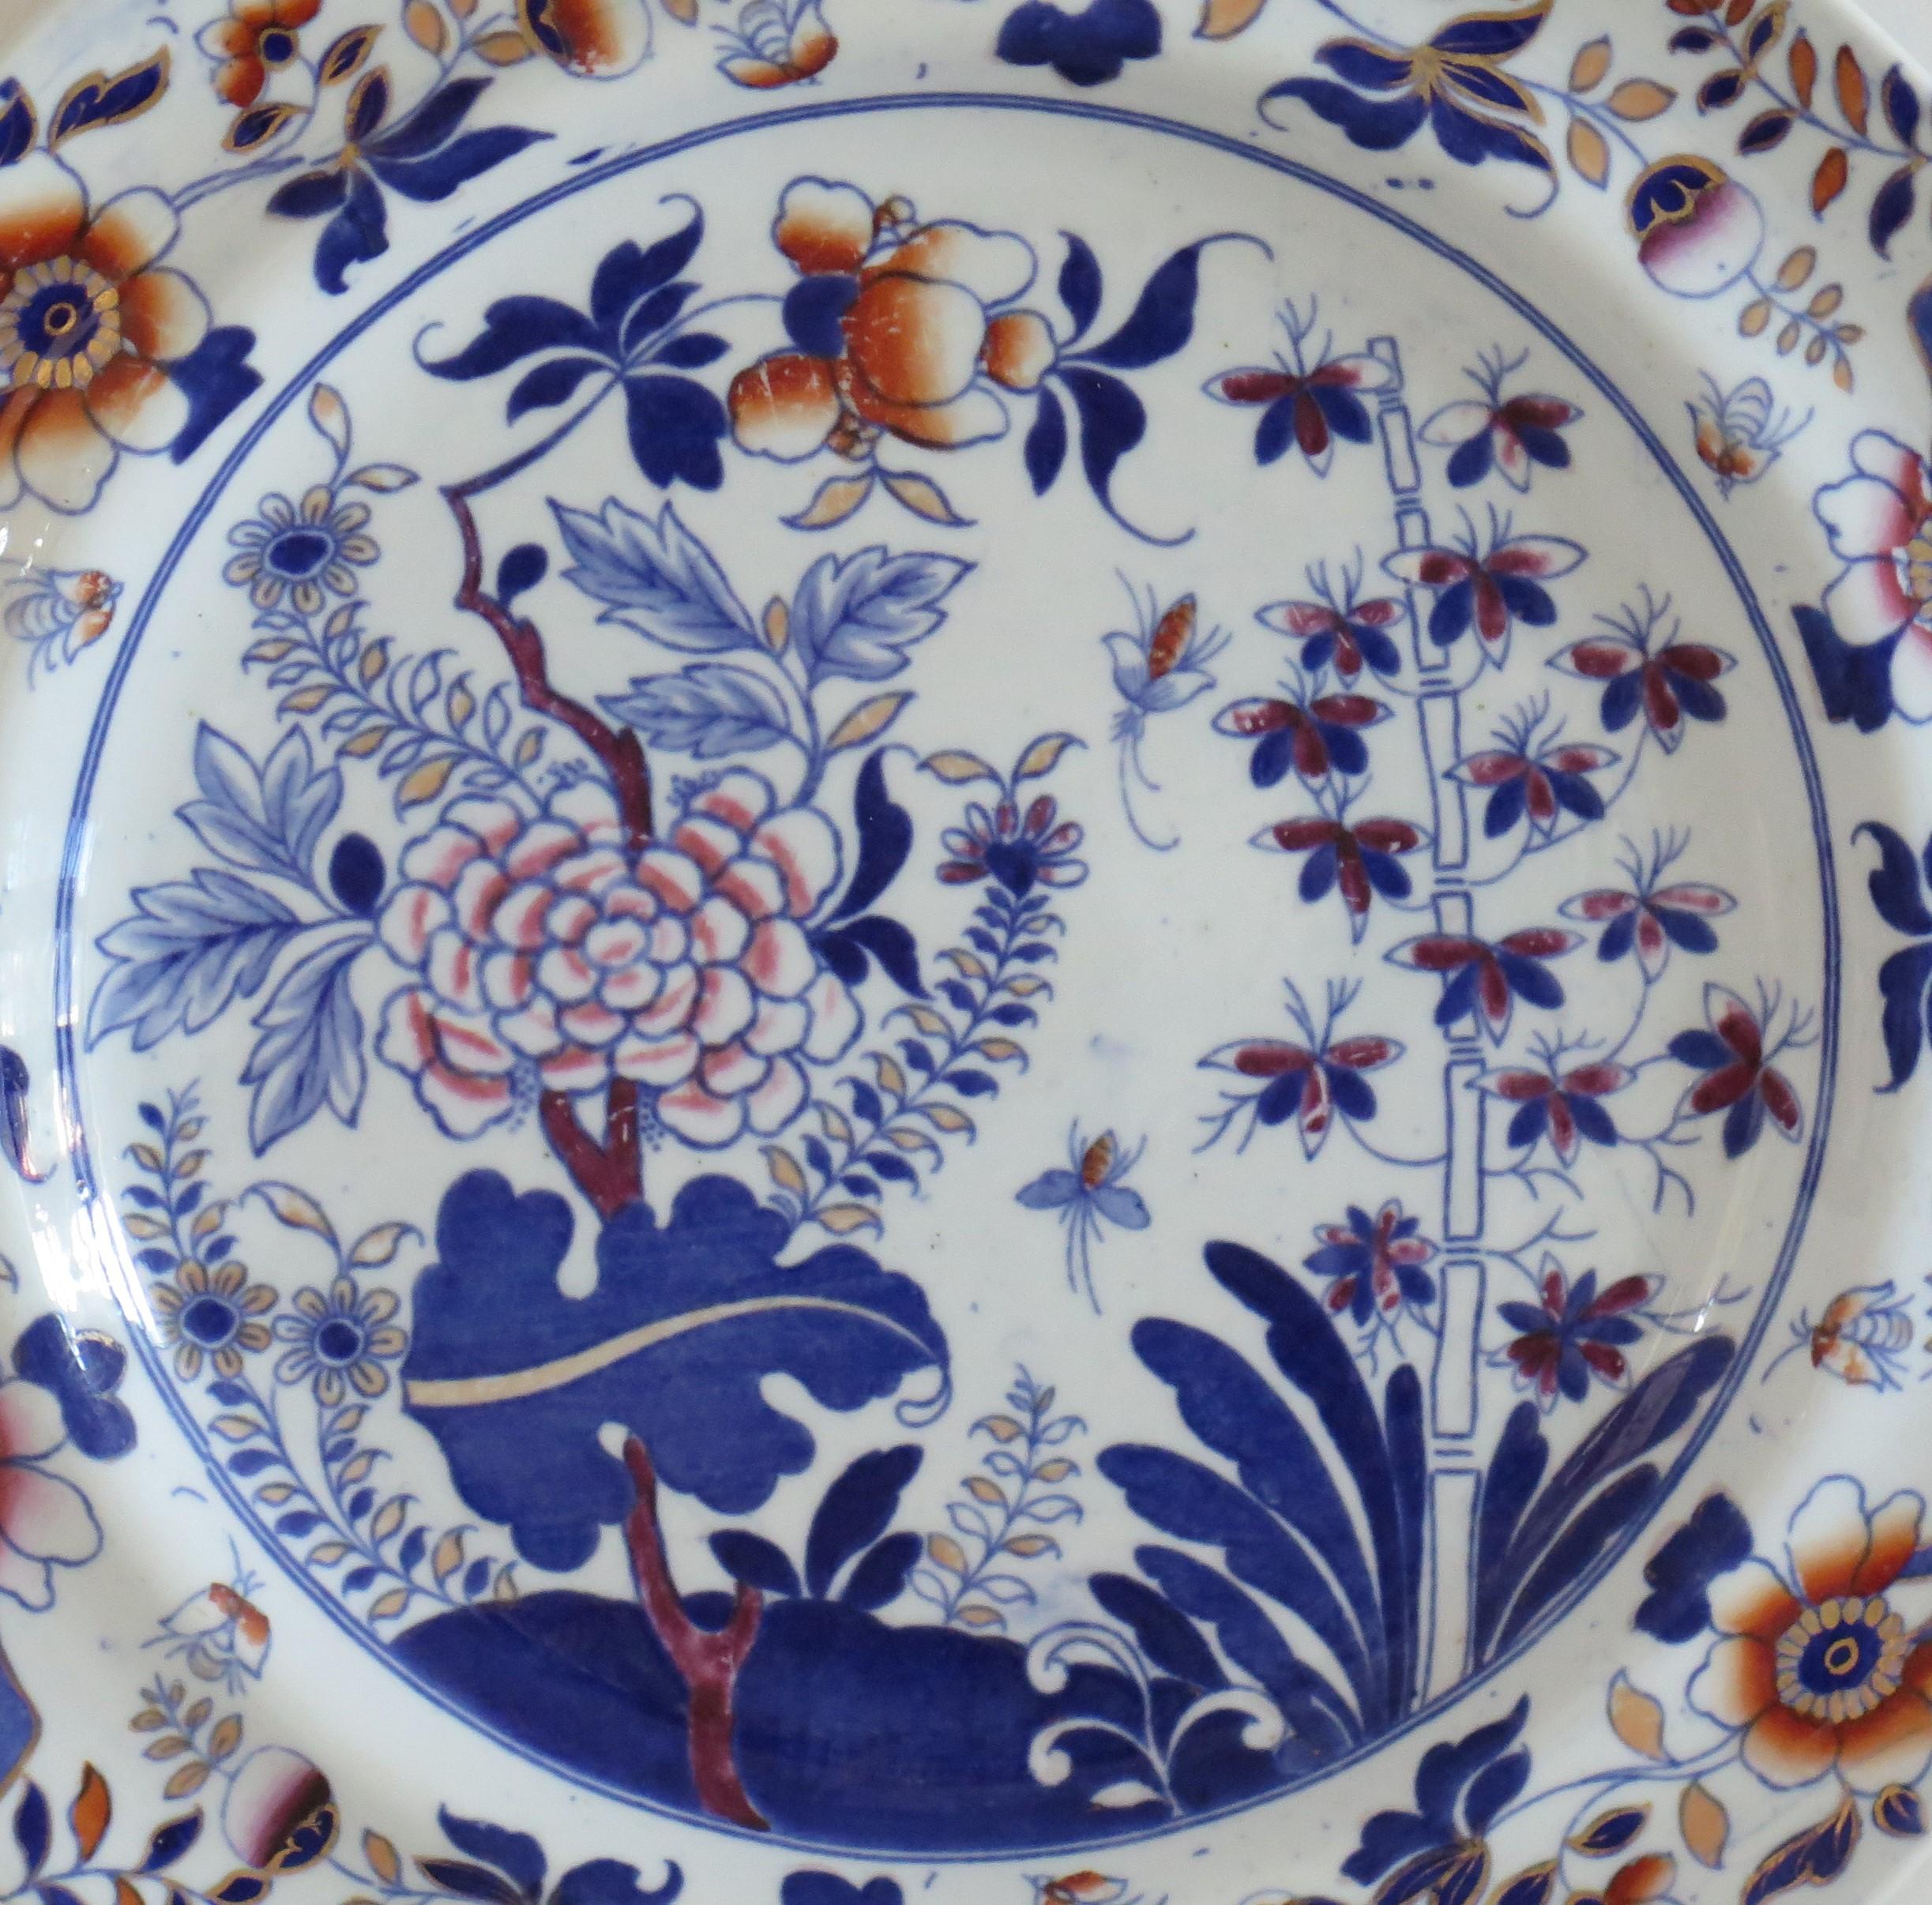 English Dinner Plate by Copeland Late Spode in Chinoiserie Pattern No. 4089, circa 1850 For Sale